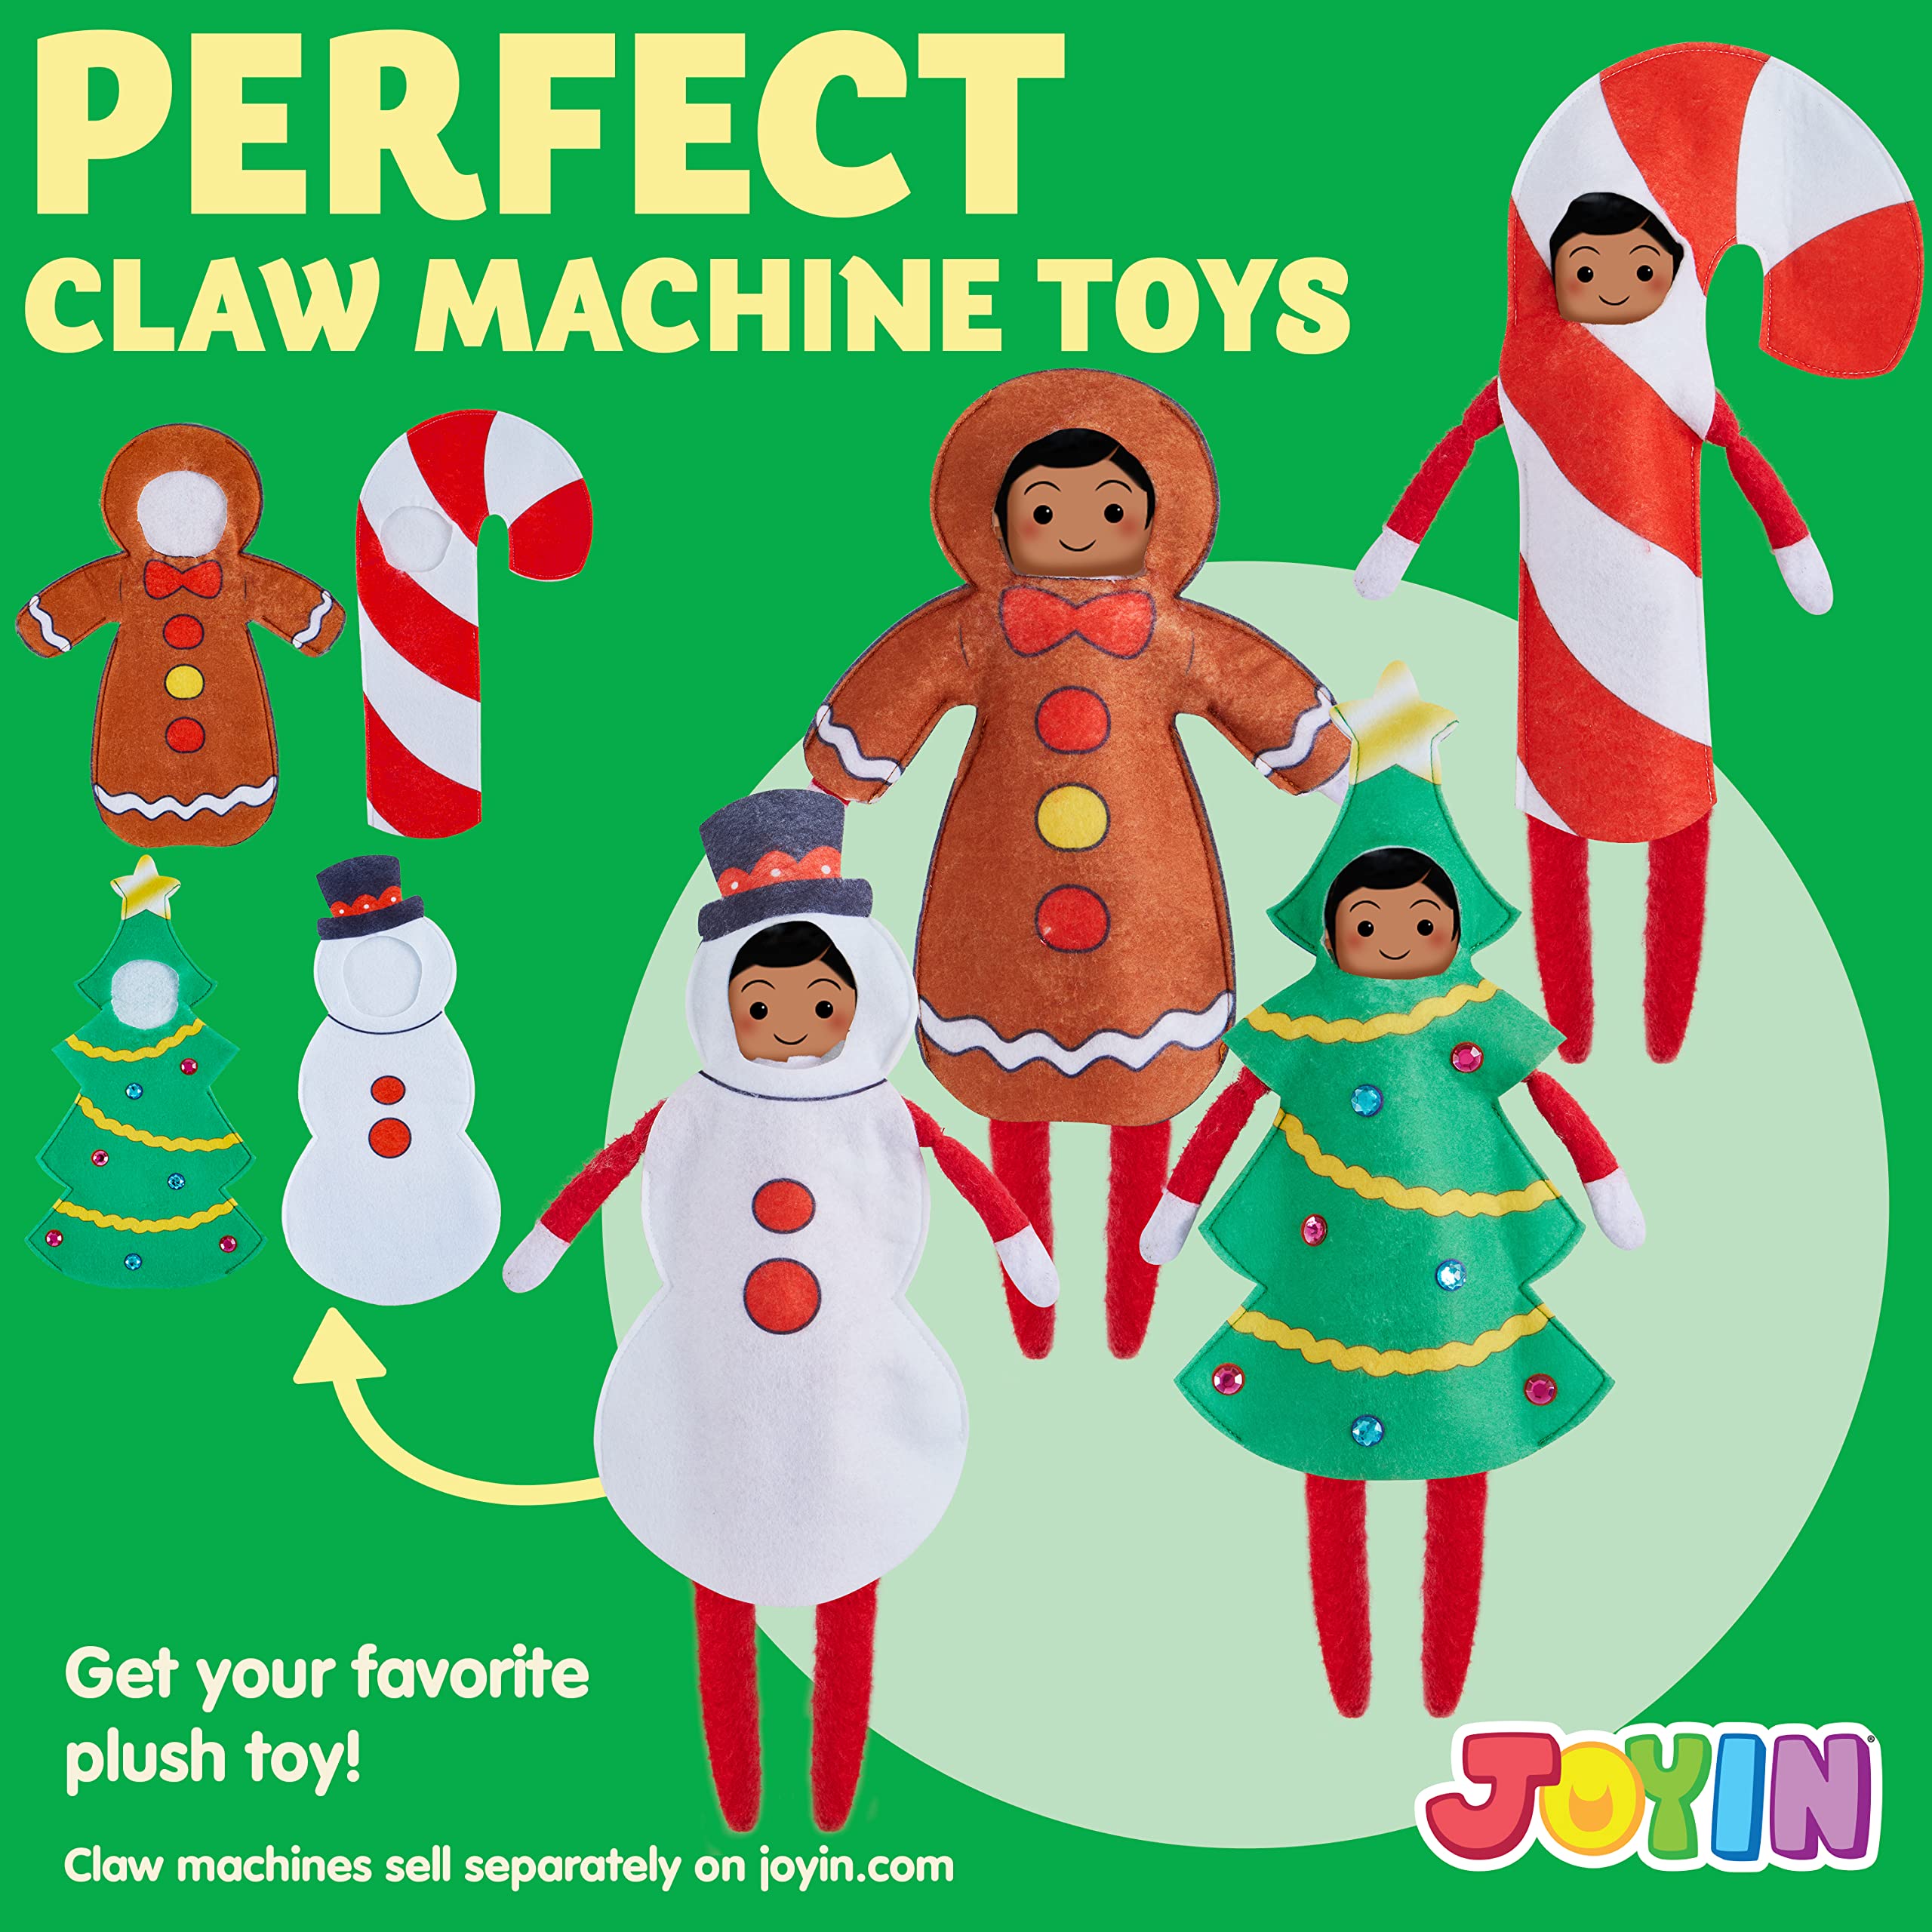 JOYIN 4 Packs Elf Couture Clothing for Elf Doll Christmas Elf Doll Couture with Candy Cane, Christmas Tree, Snowman, and Gingerbread Designs Doll Outfit for Christmas Decor, Holiday Specials